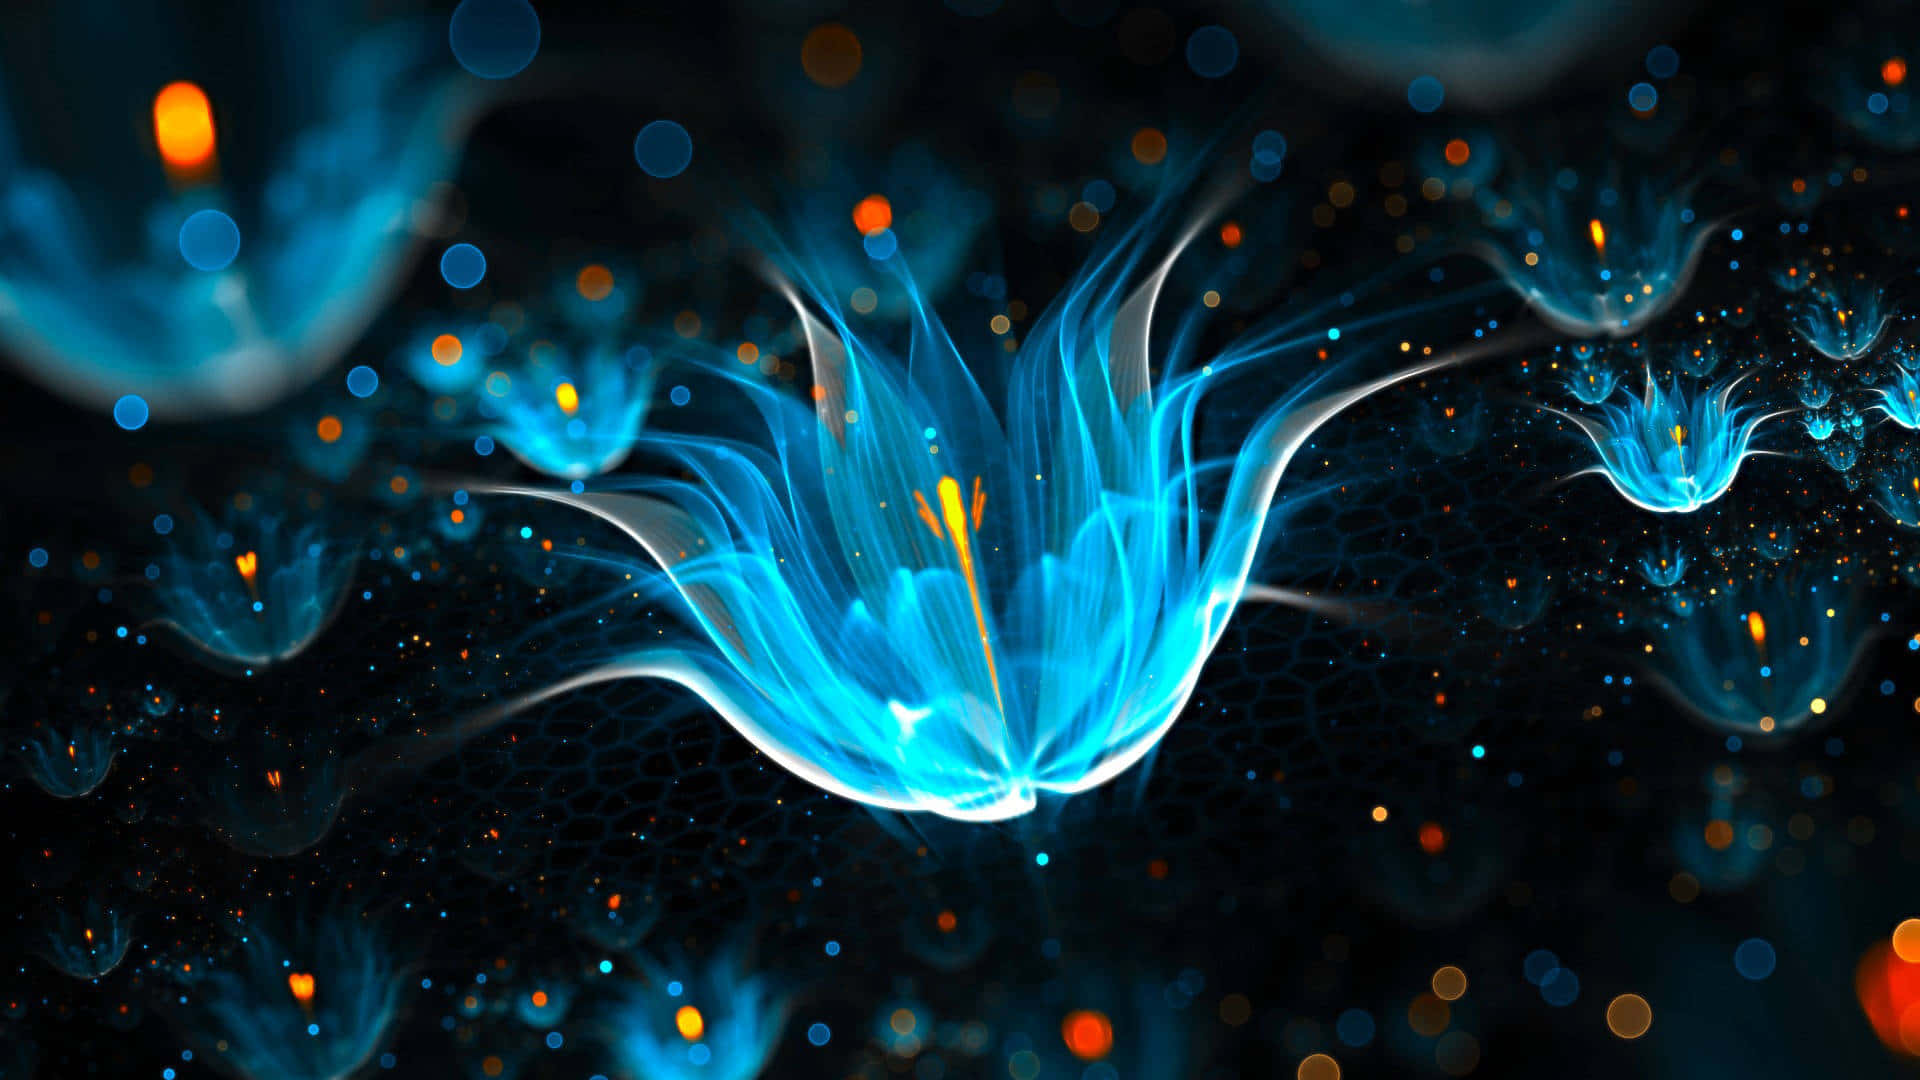 A Blue Flower With Glowing Lights In The Background Wallpaper